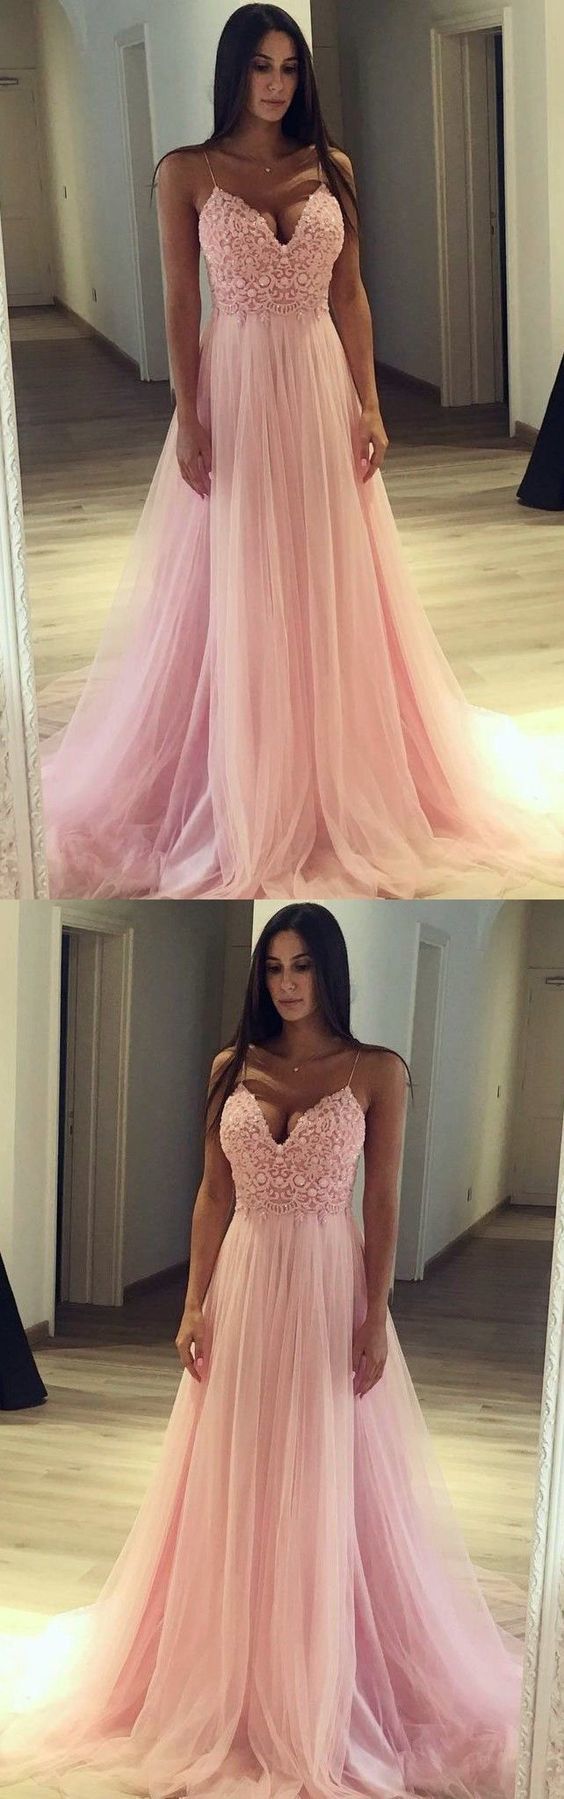 Prom Dress with Thin Straps, Back To School Dresses, Prom Dresses For Teens, Graduation Party Dresses cg1074